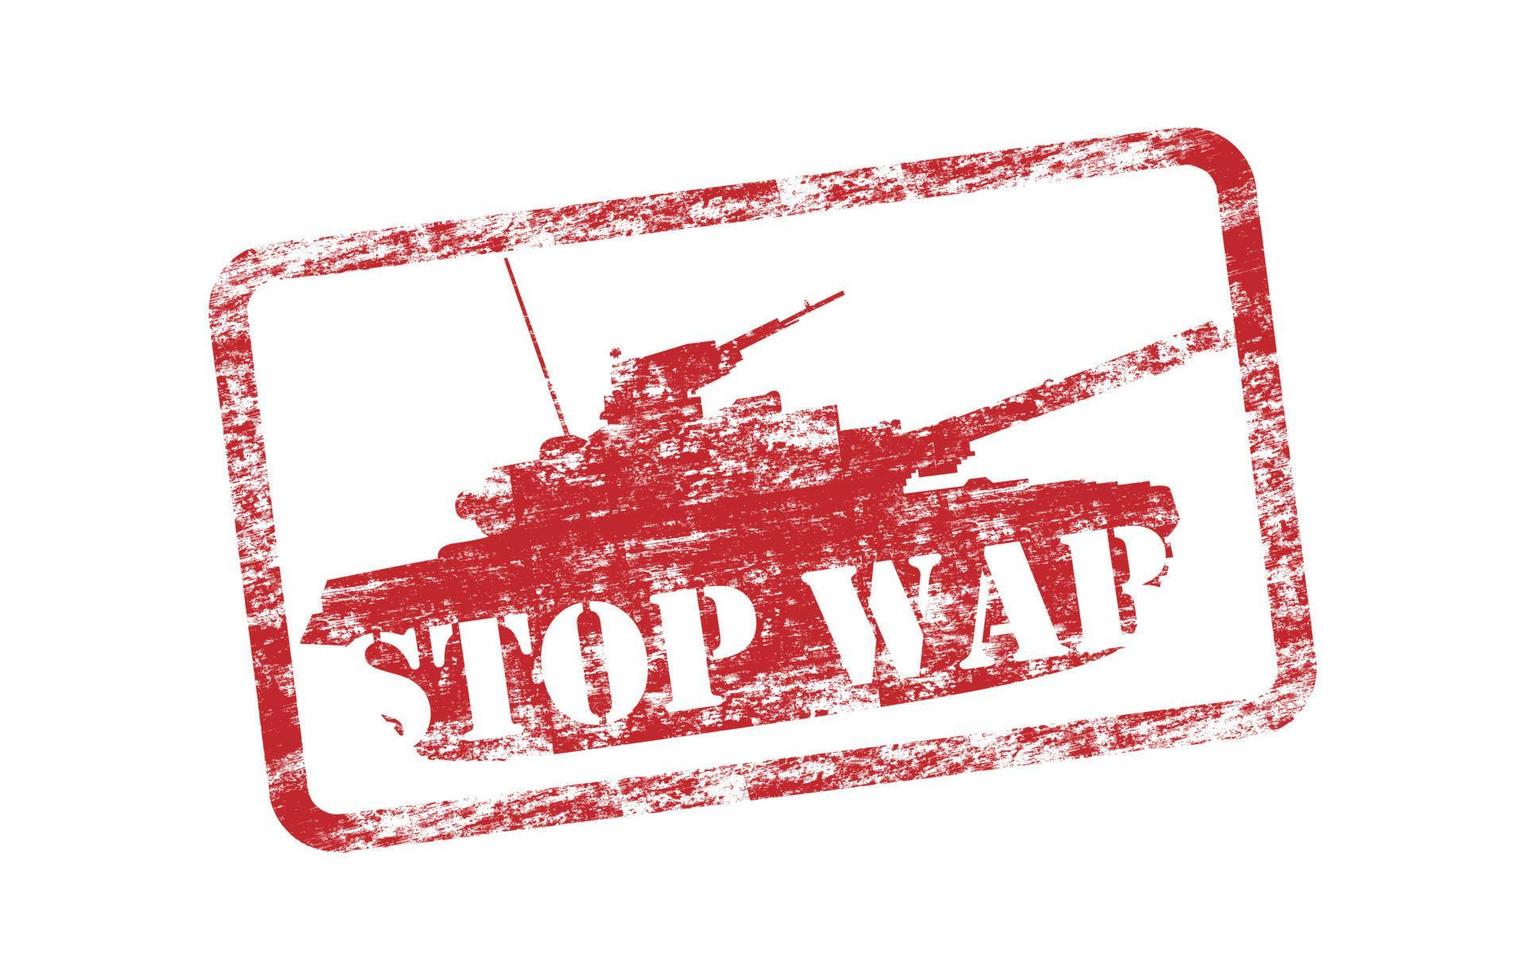 Stop War grunge rubber stamp text. No world war sign icon. Vector illustration image Isolated on white background.